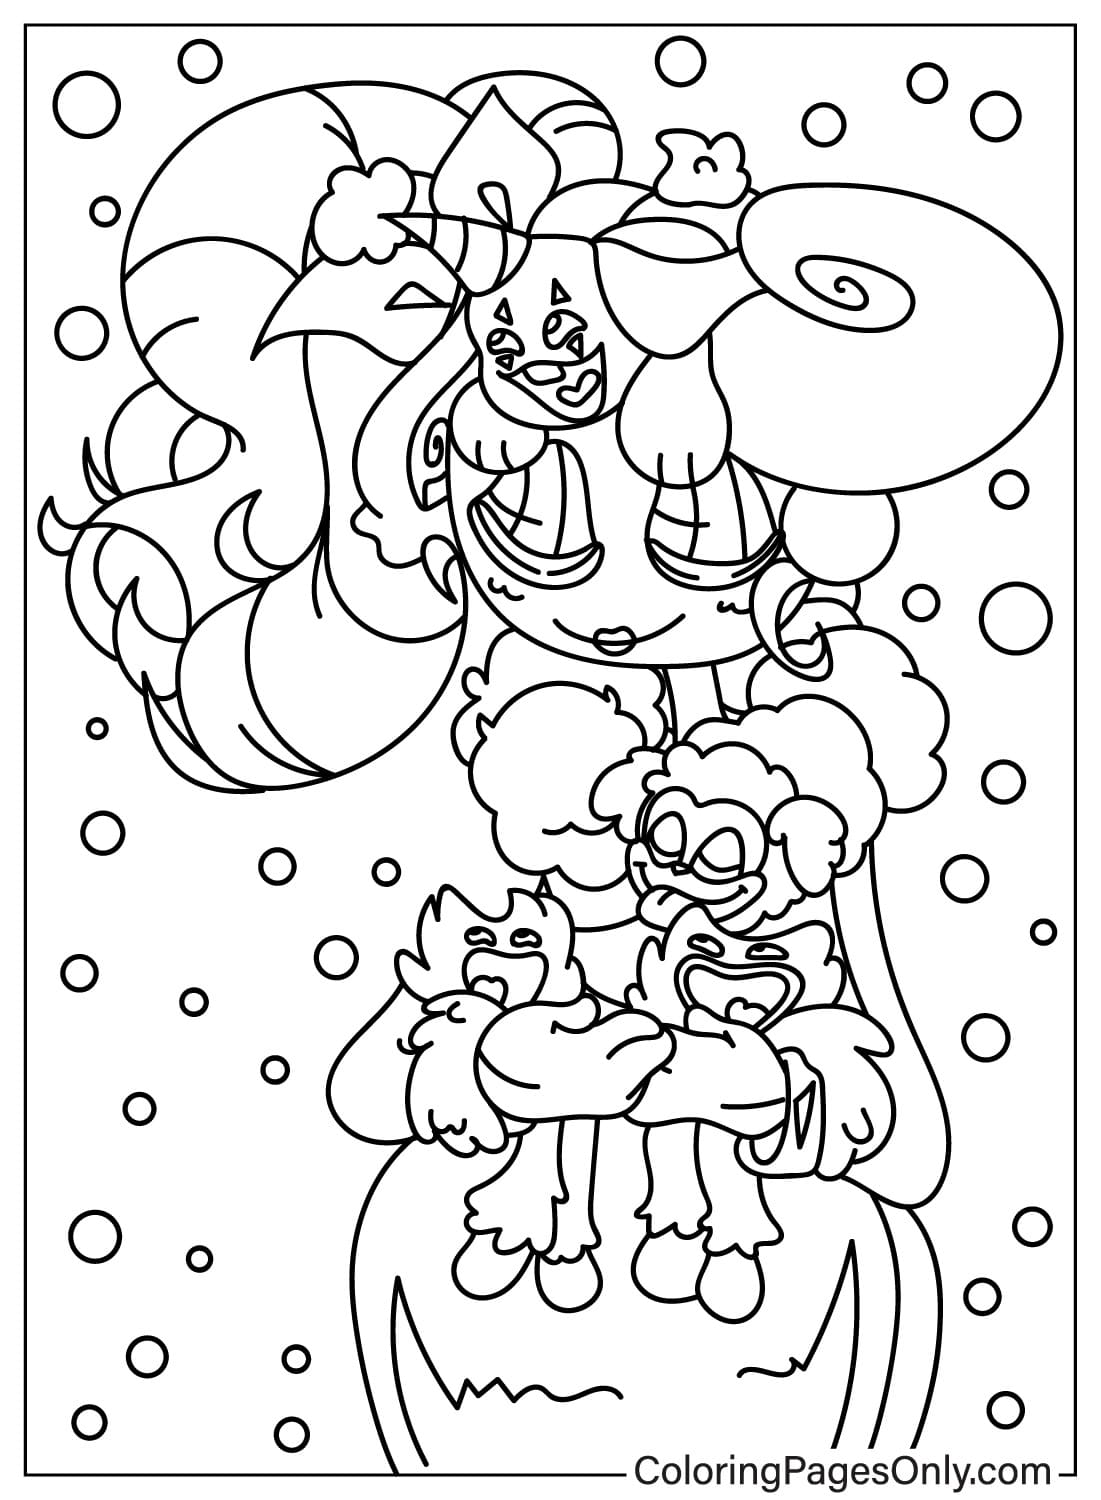 Poppy Playtime Coloring Page Free Printable from Poppy Playtime